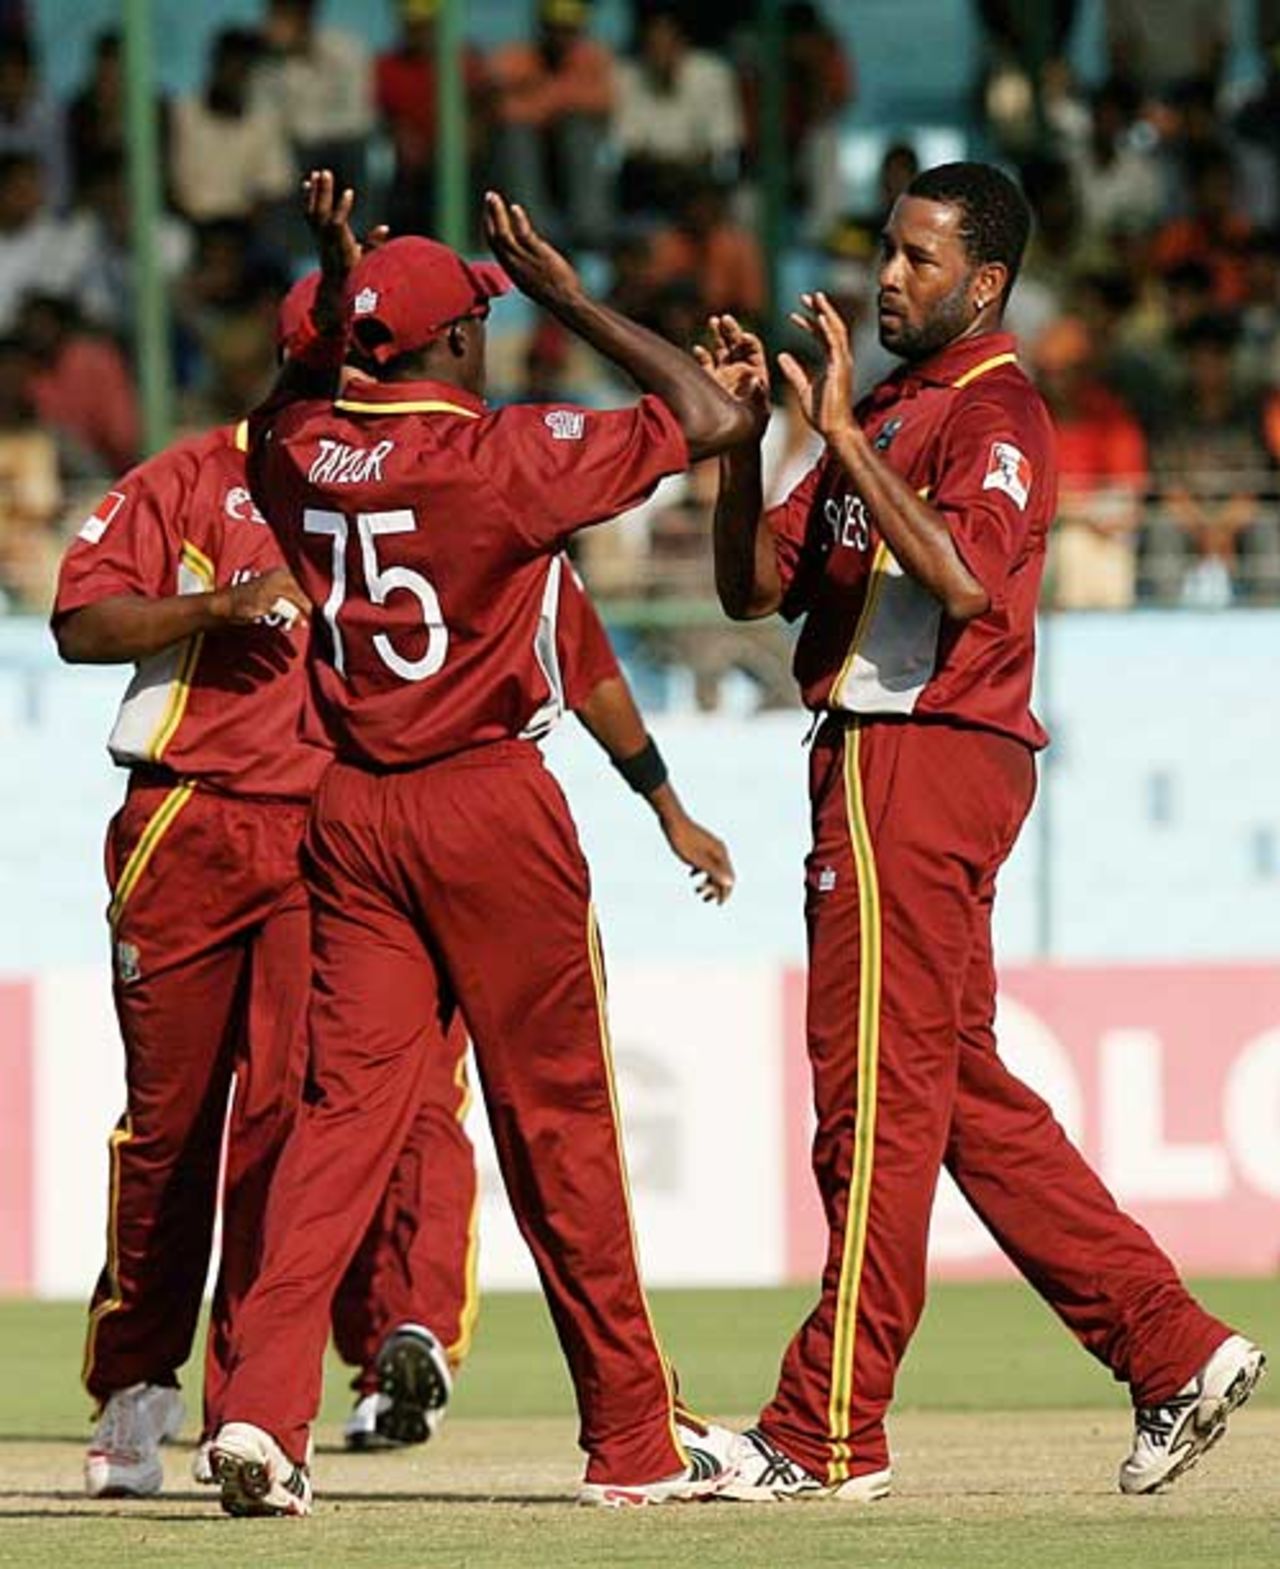 Corey Collymore celebrates one of his two wickets; he removed Saqibul Hasan and Habibul Bashar in two balls, West Indies v Bangladesh, Champions Trophy, Jaipur, October 11, 2006